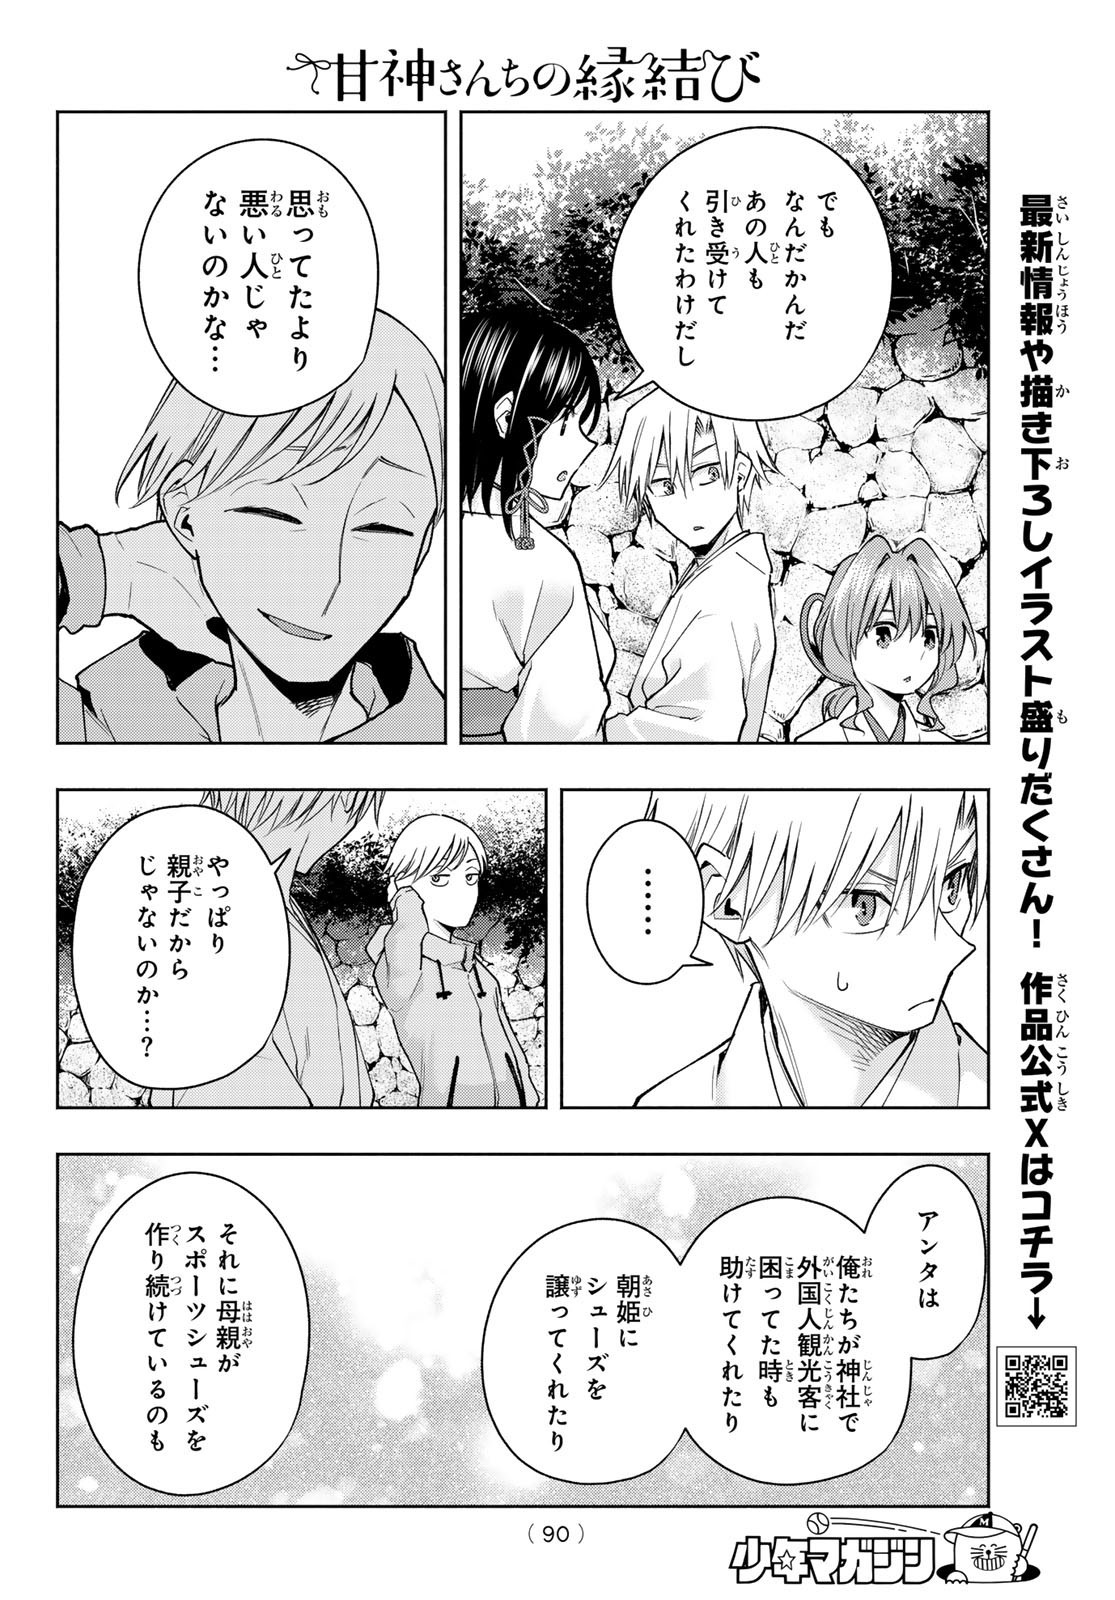 Weekly Shōnen Magazine - 週刊少年マガジン - Chapter 2024-30 - Page 87